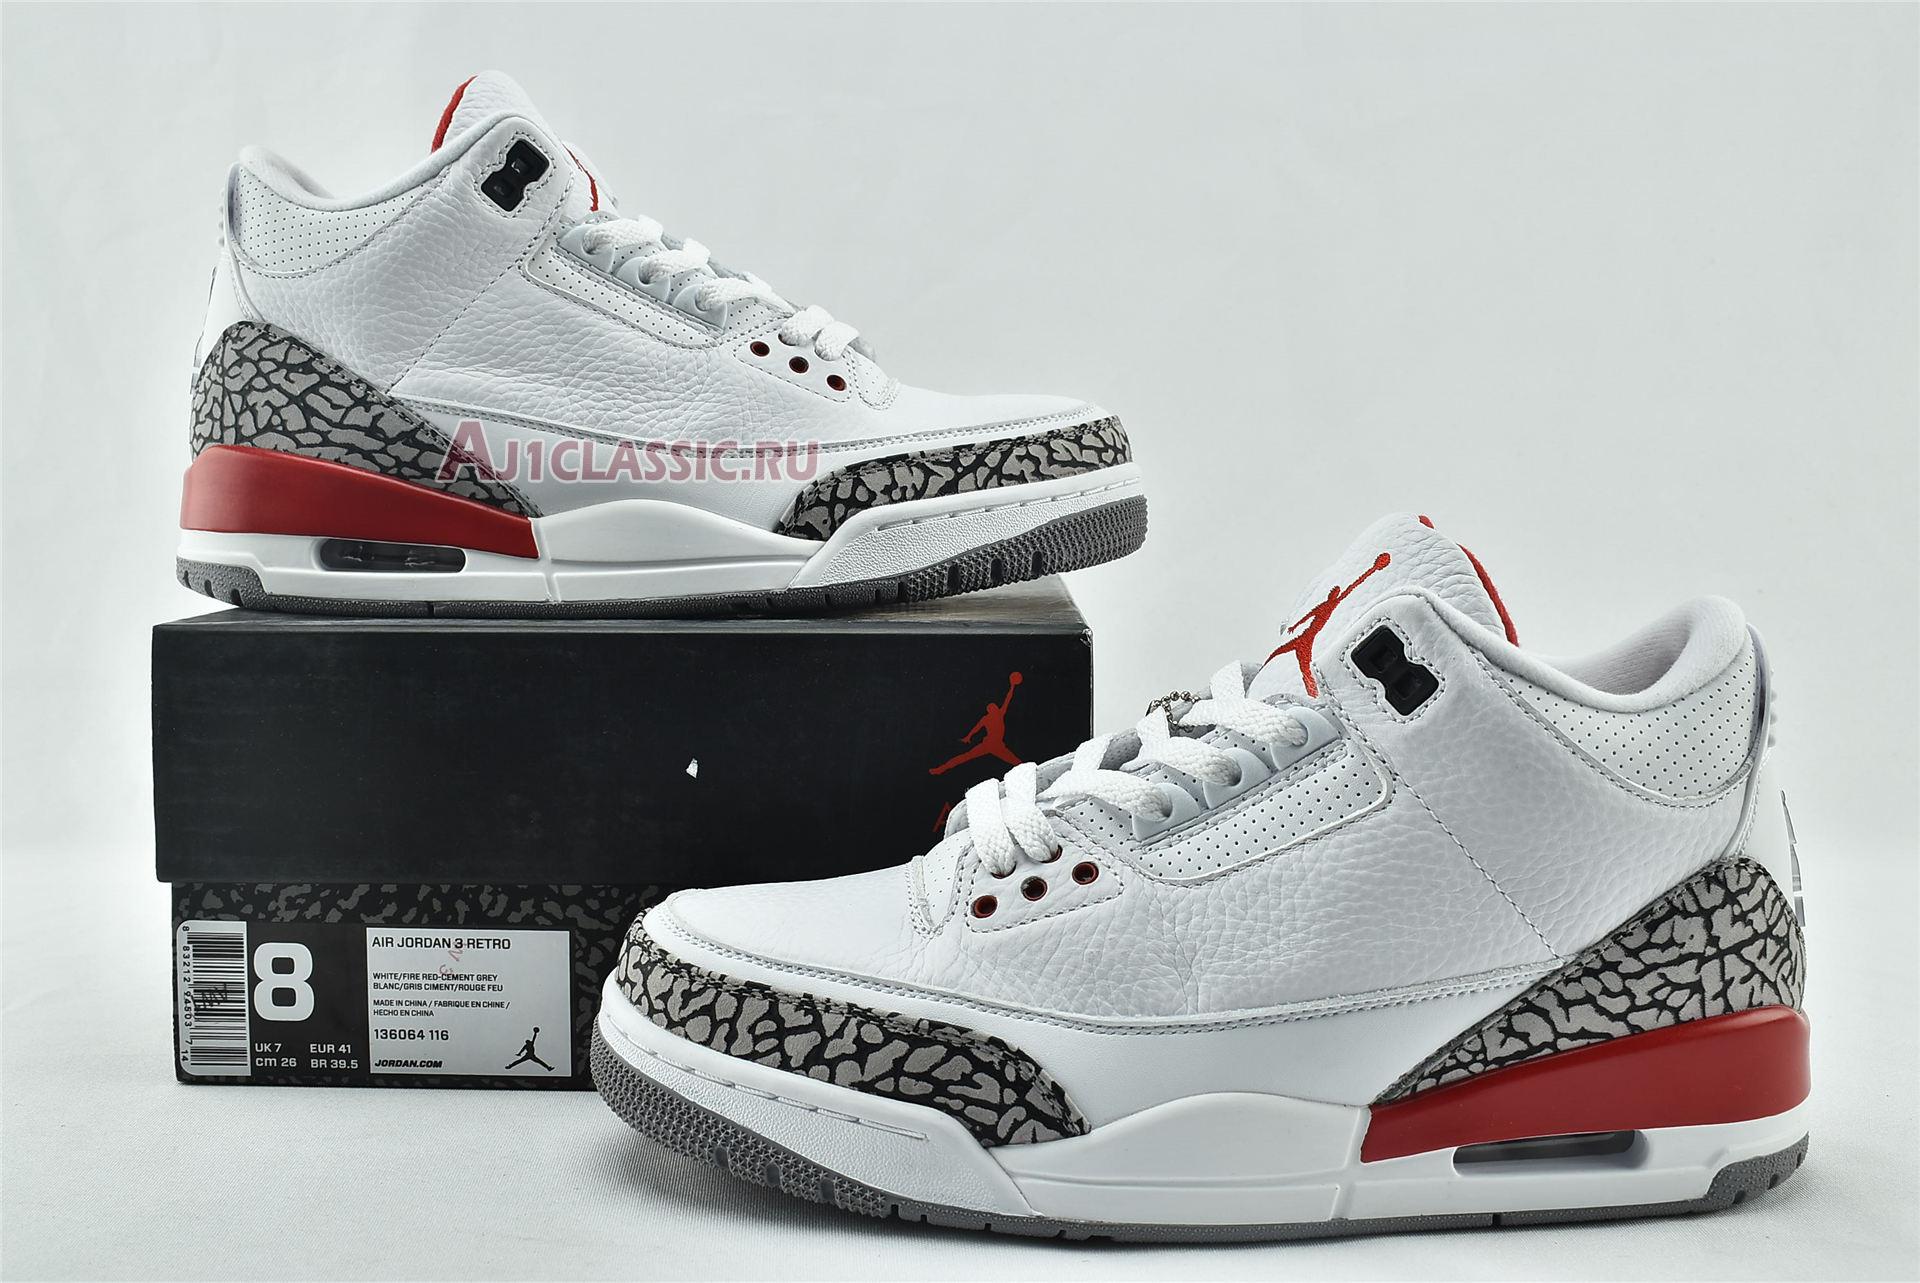 Air Jordan 3 Retro Hall of Fame 136064-116 White/Cement Grey-Black-Fire Red Sneakers